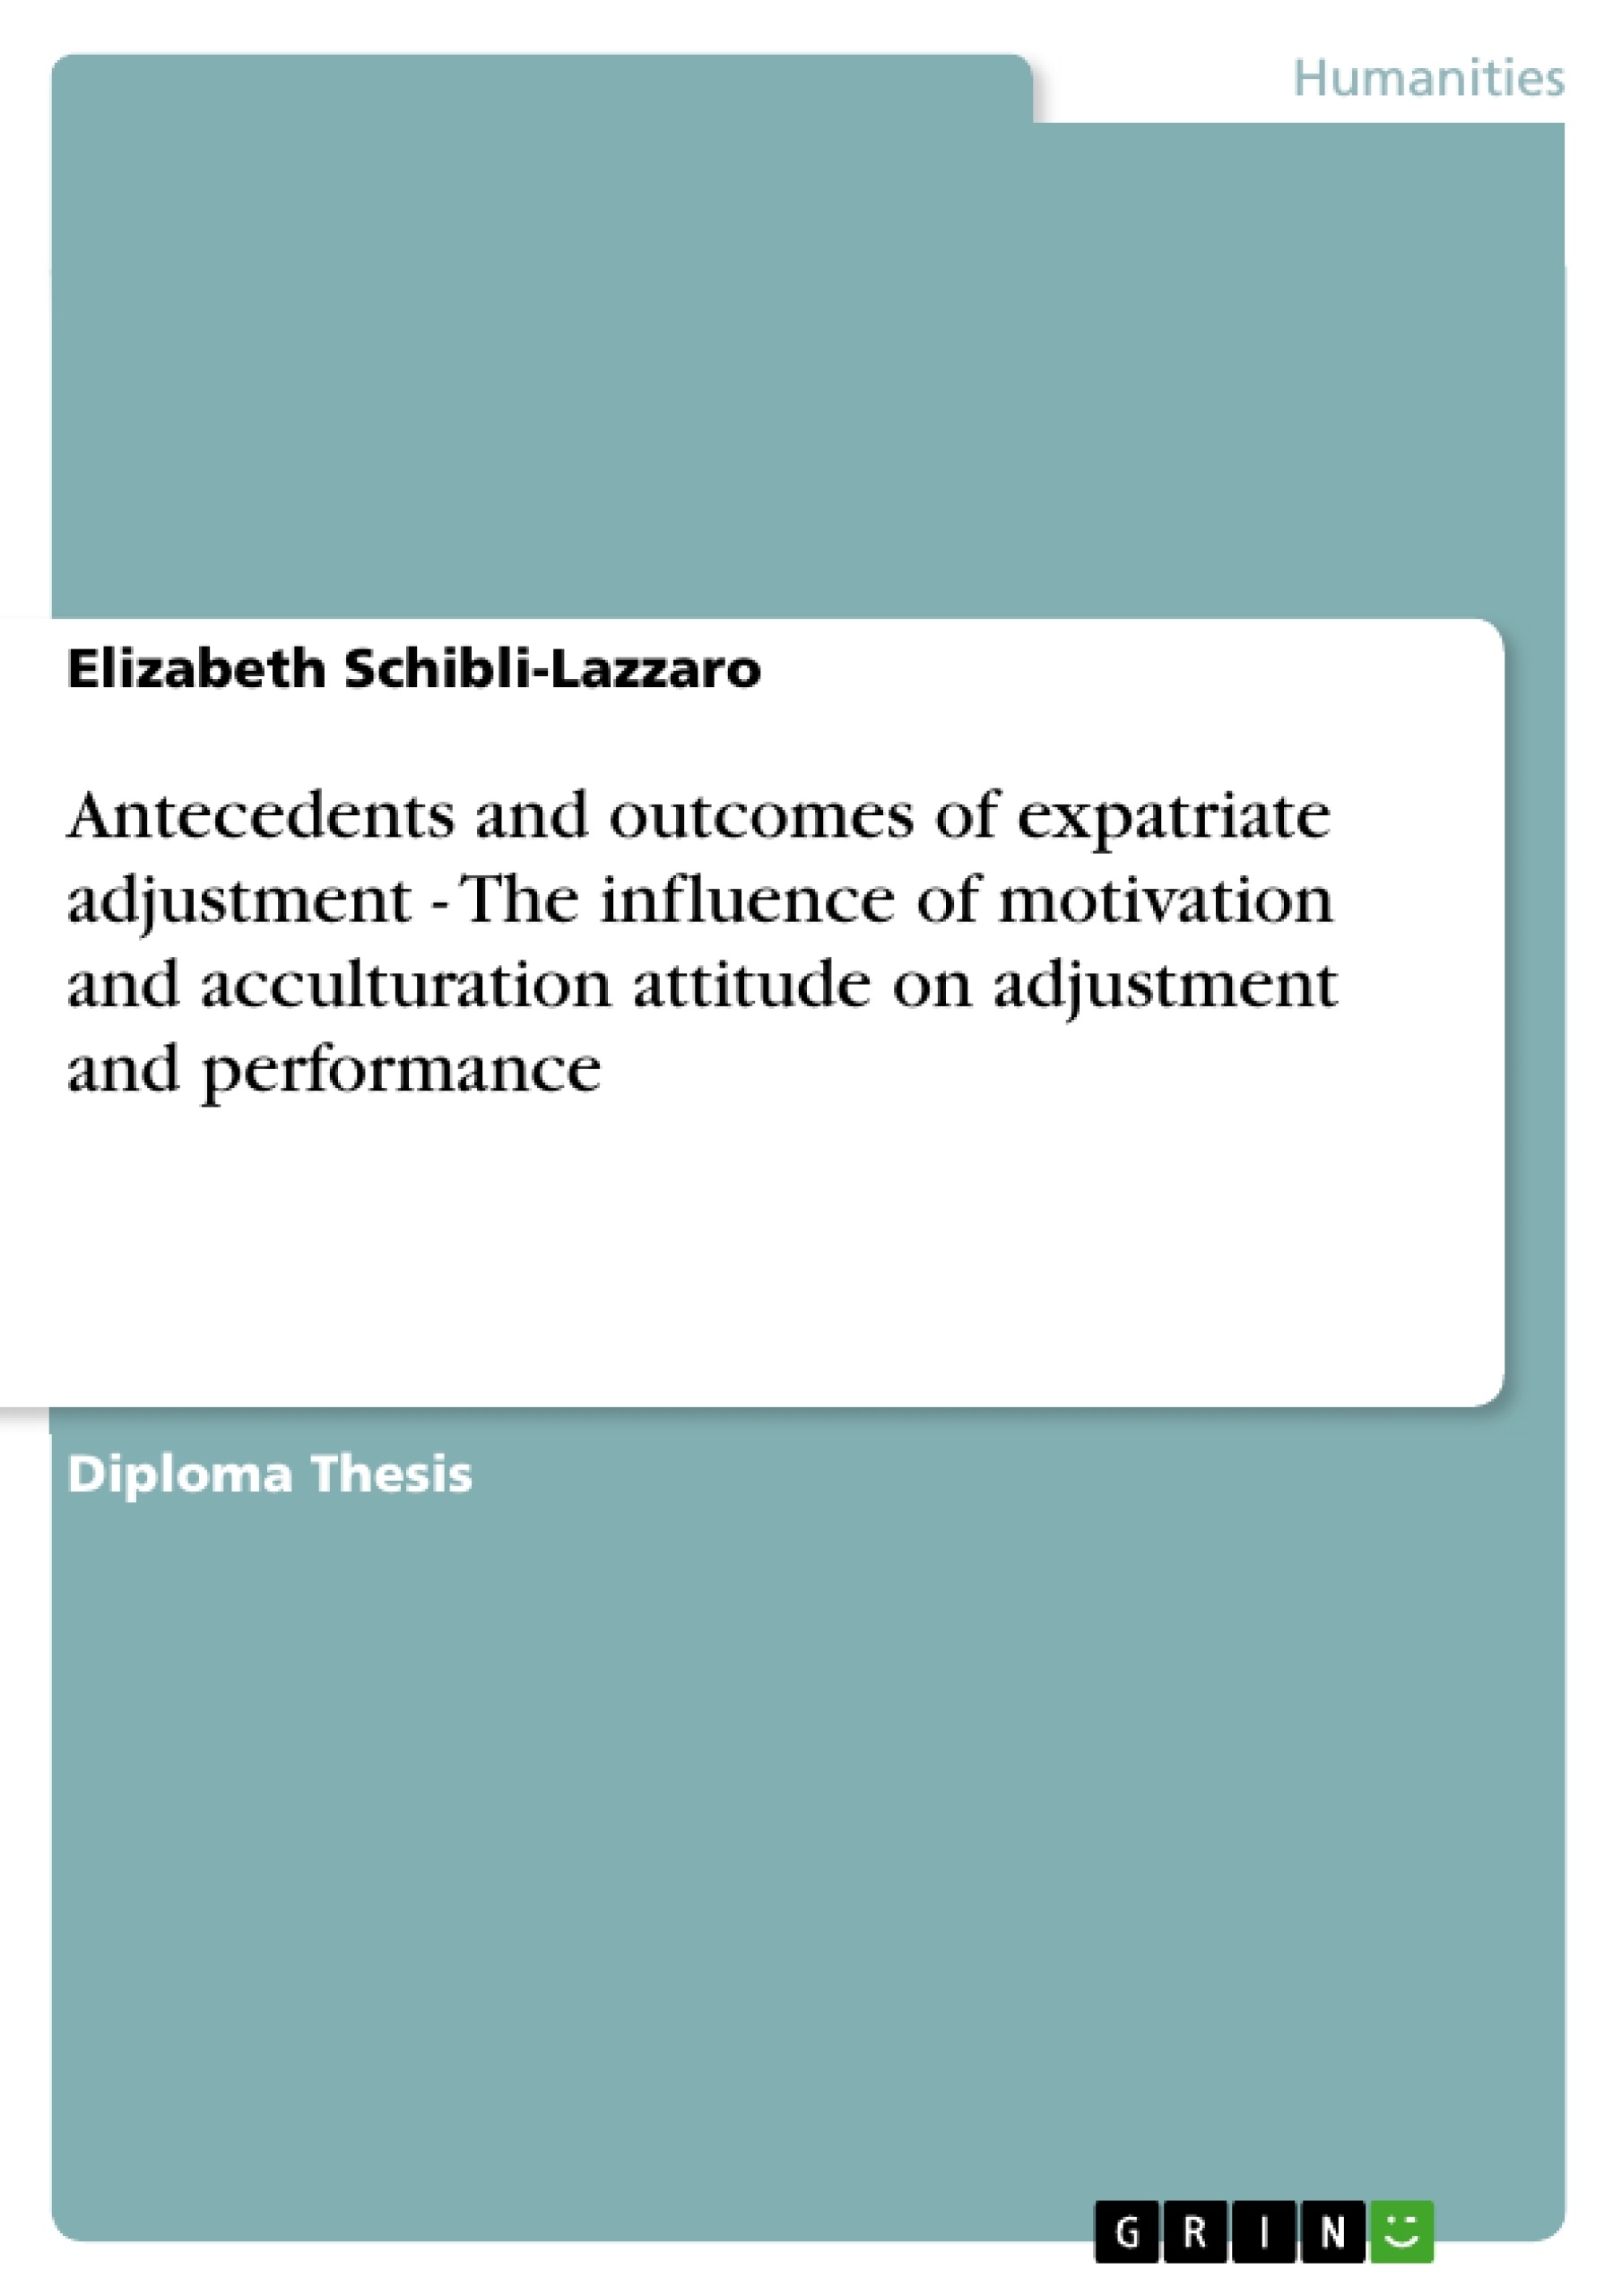 Título: Antecedents and outcomes of expatriate adjustment - The influence of motivation and acculturation attitude on adjustment and performance